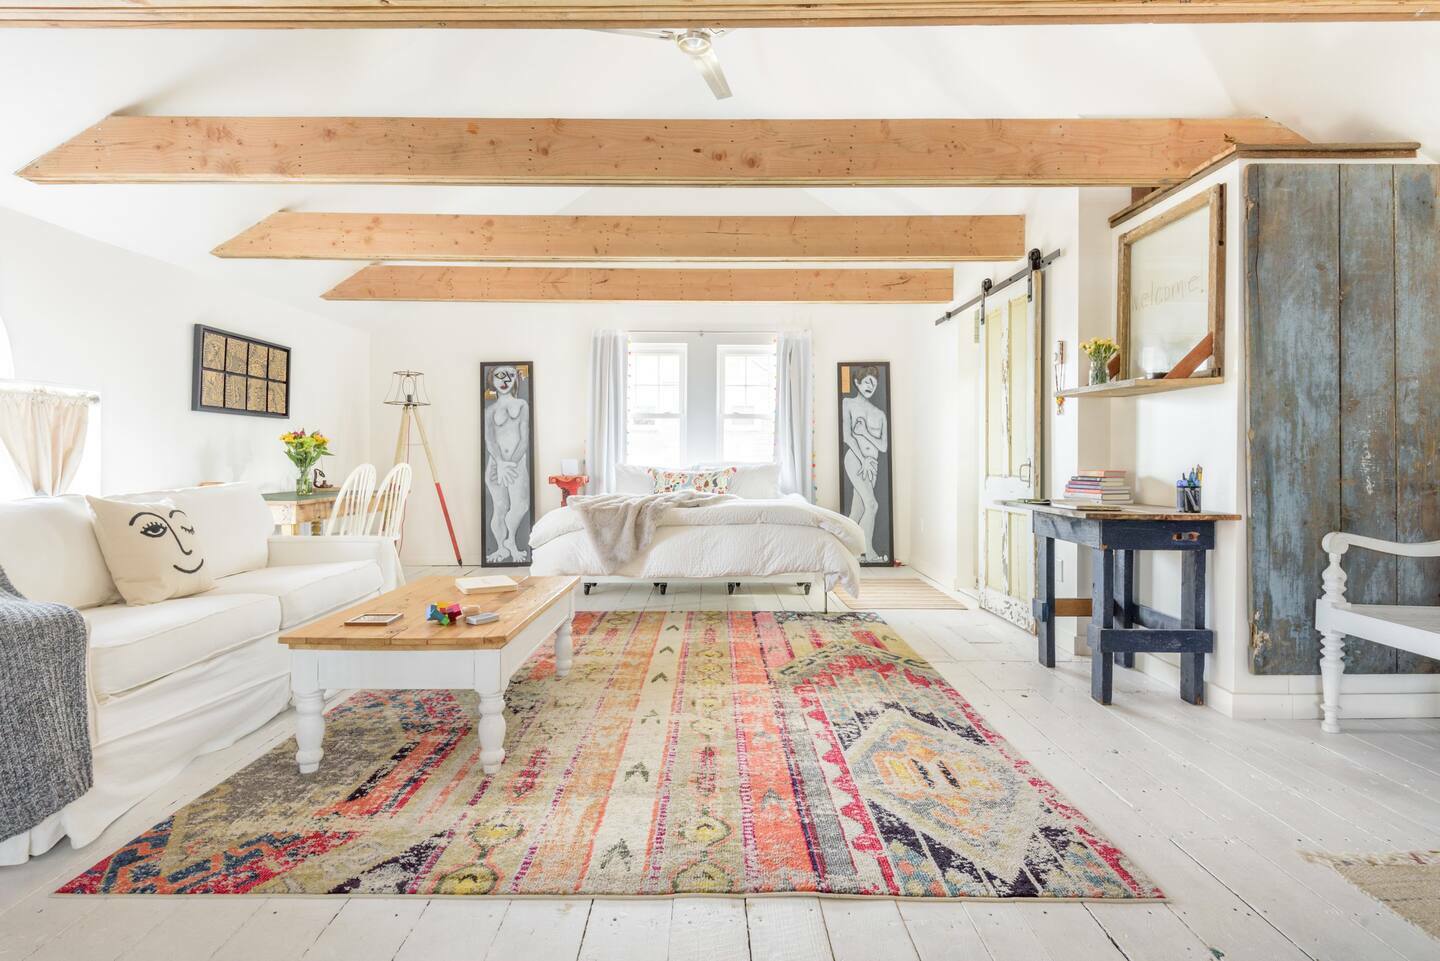 The 9 Most Romantic Airbnbs near NYC